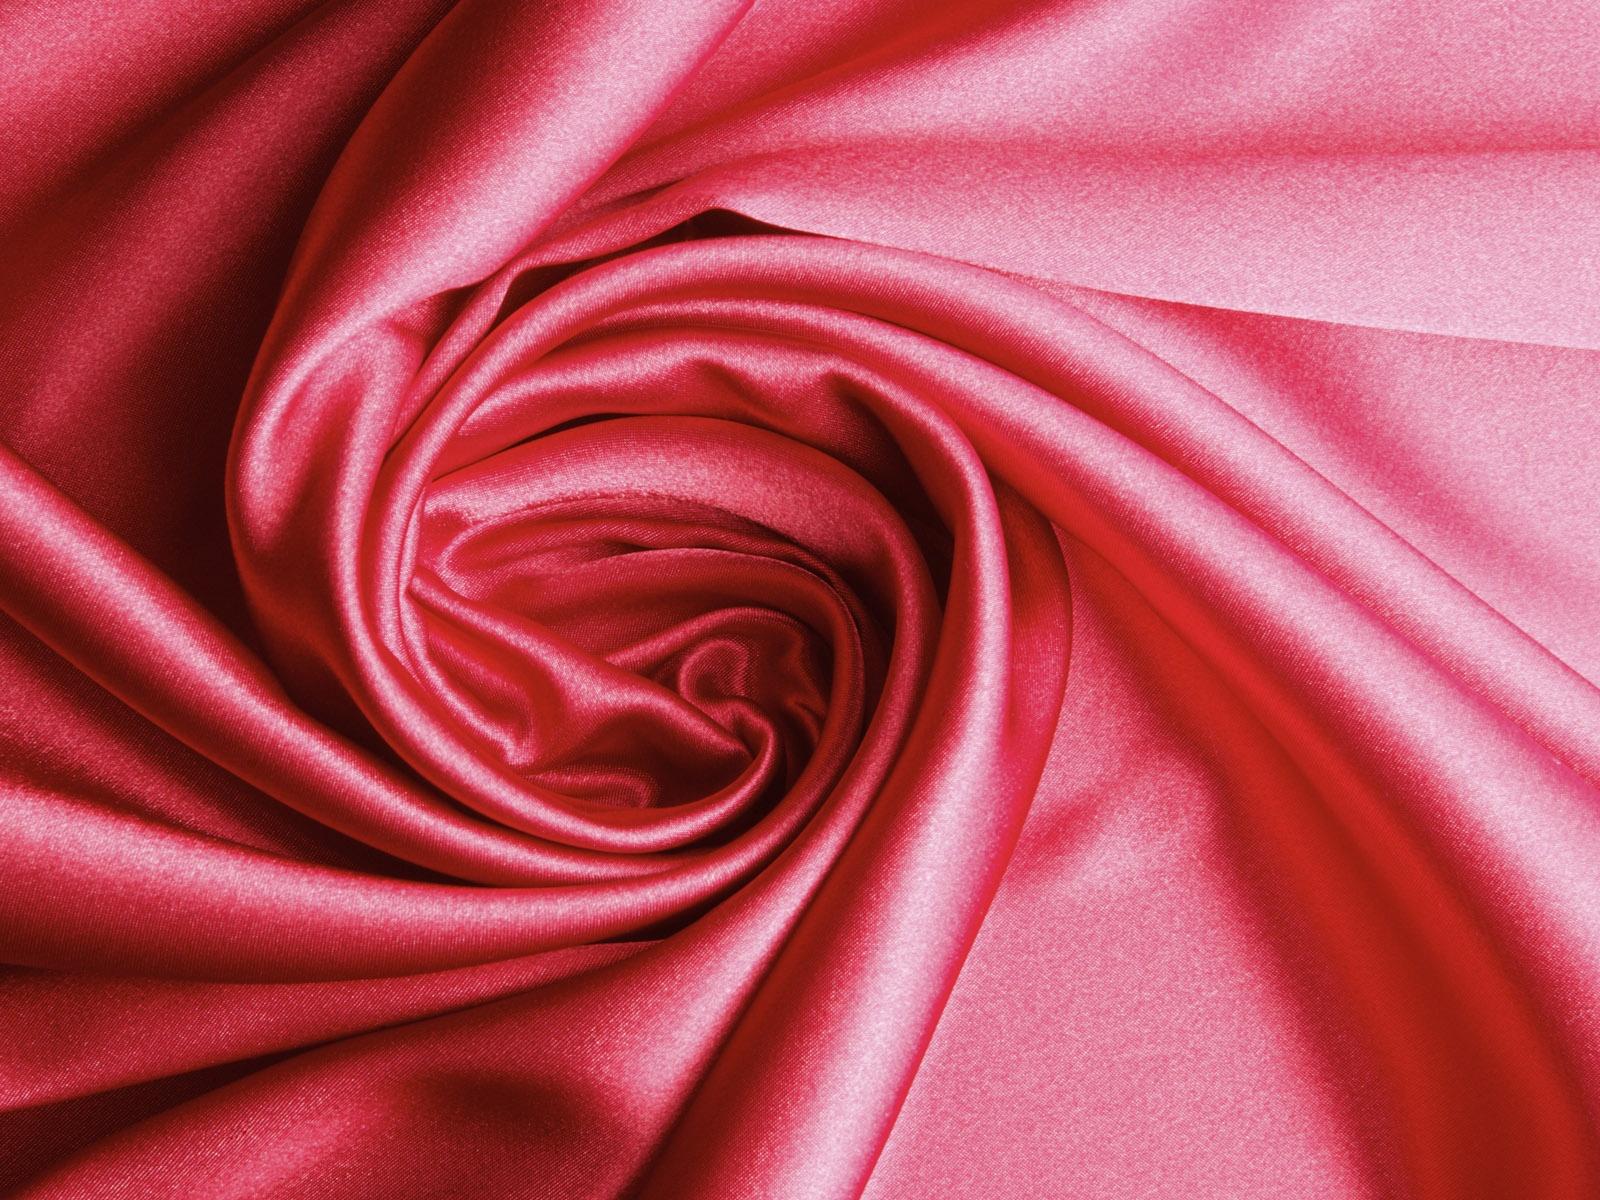 Wallpaper Pink cloth still life 1920x1200 HD Picture, Image